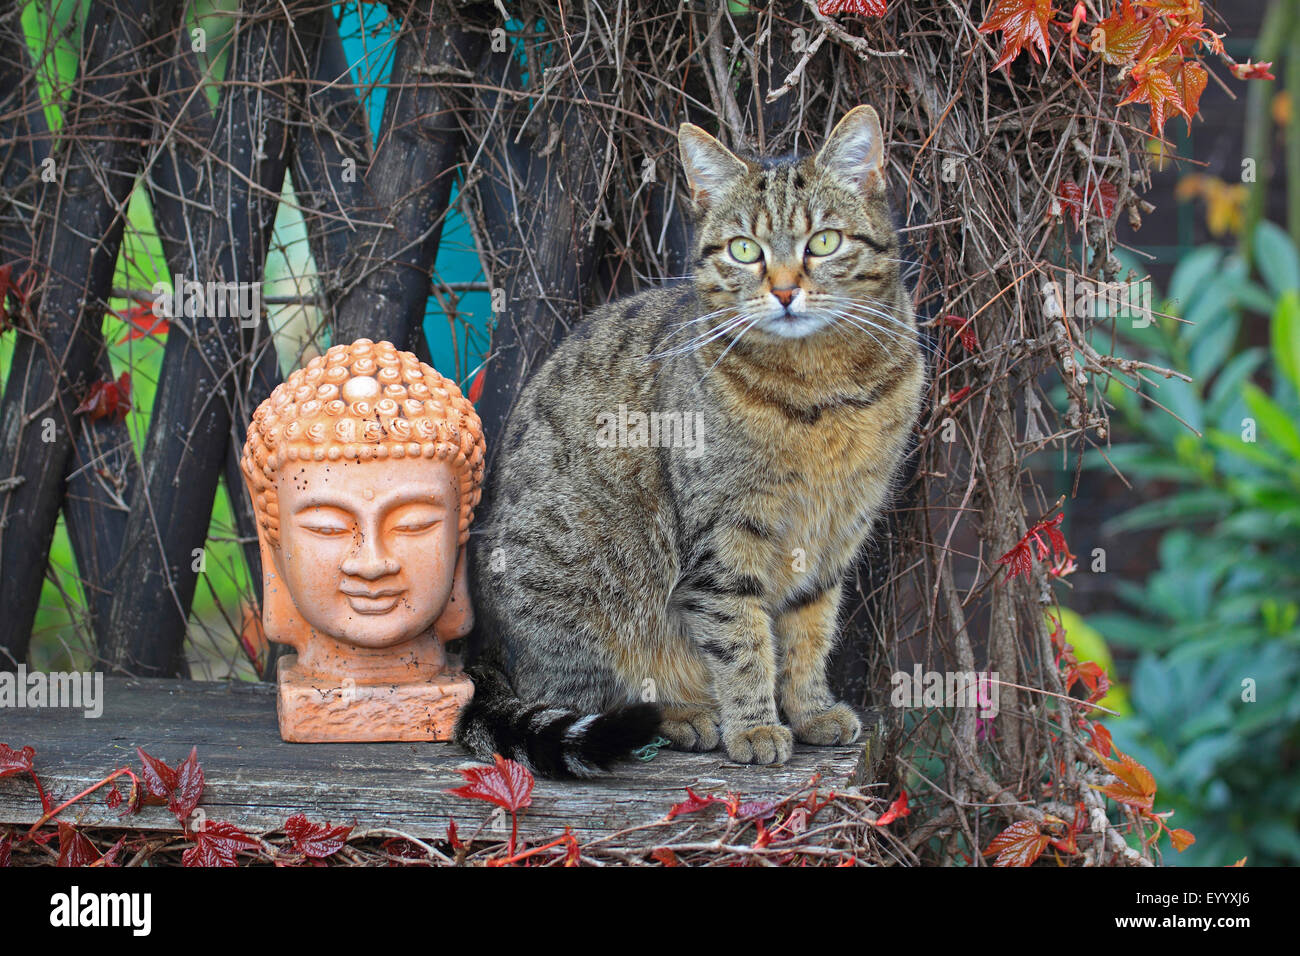 domestic cat, house cat (Felis silvestris f. catus), striped house cat sitting on a garden bench beside a garden sculpture, Germany Stock Photo